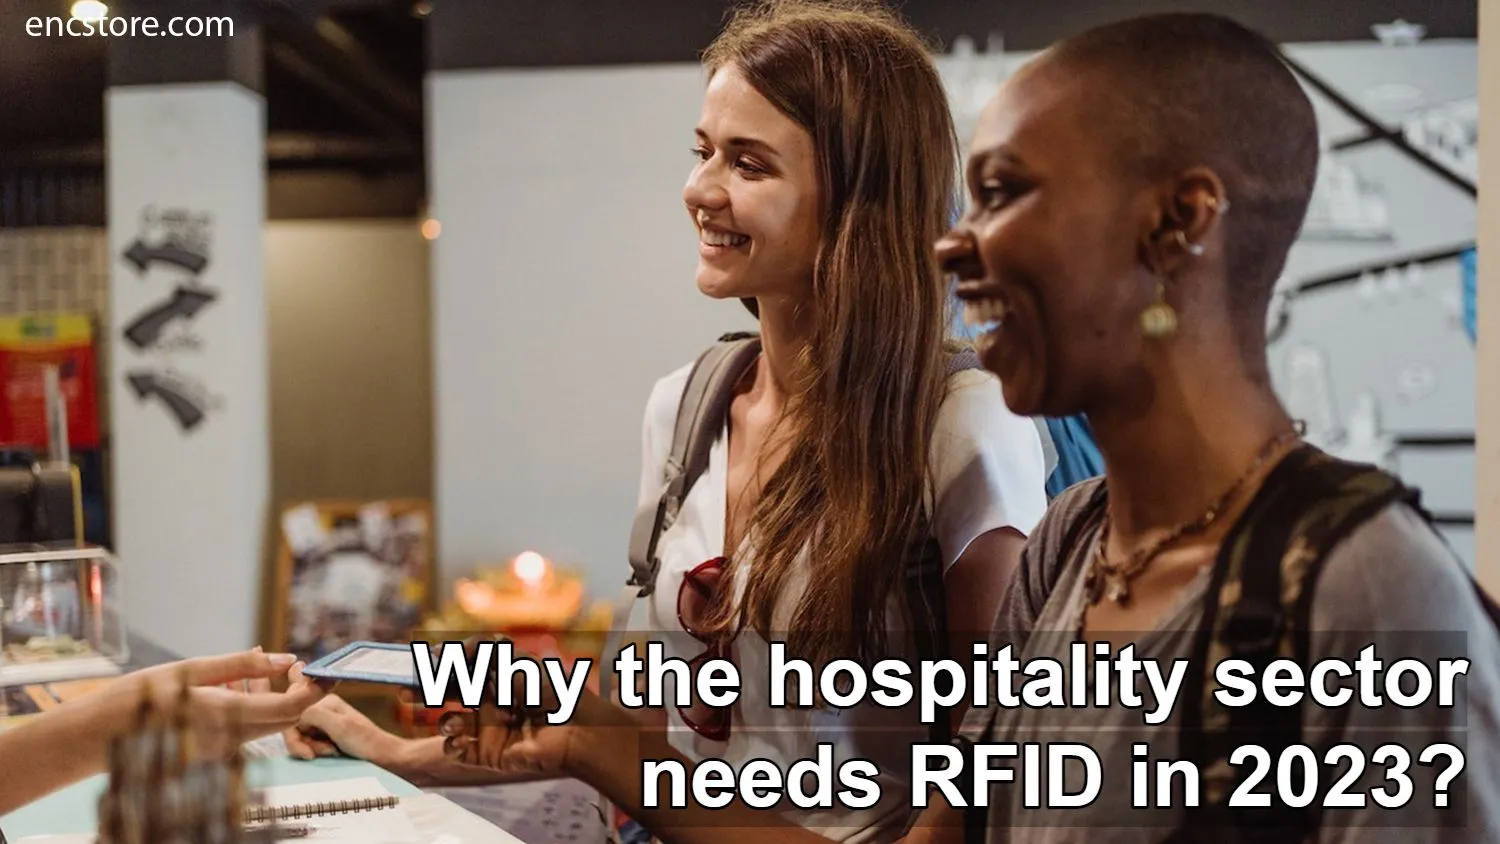 Why the hospitality sector needs RFID